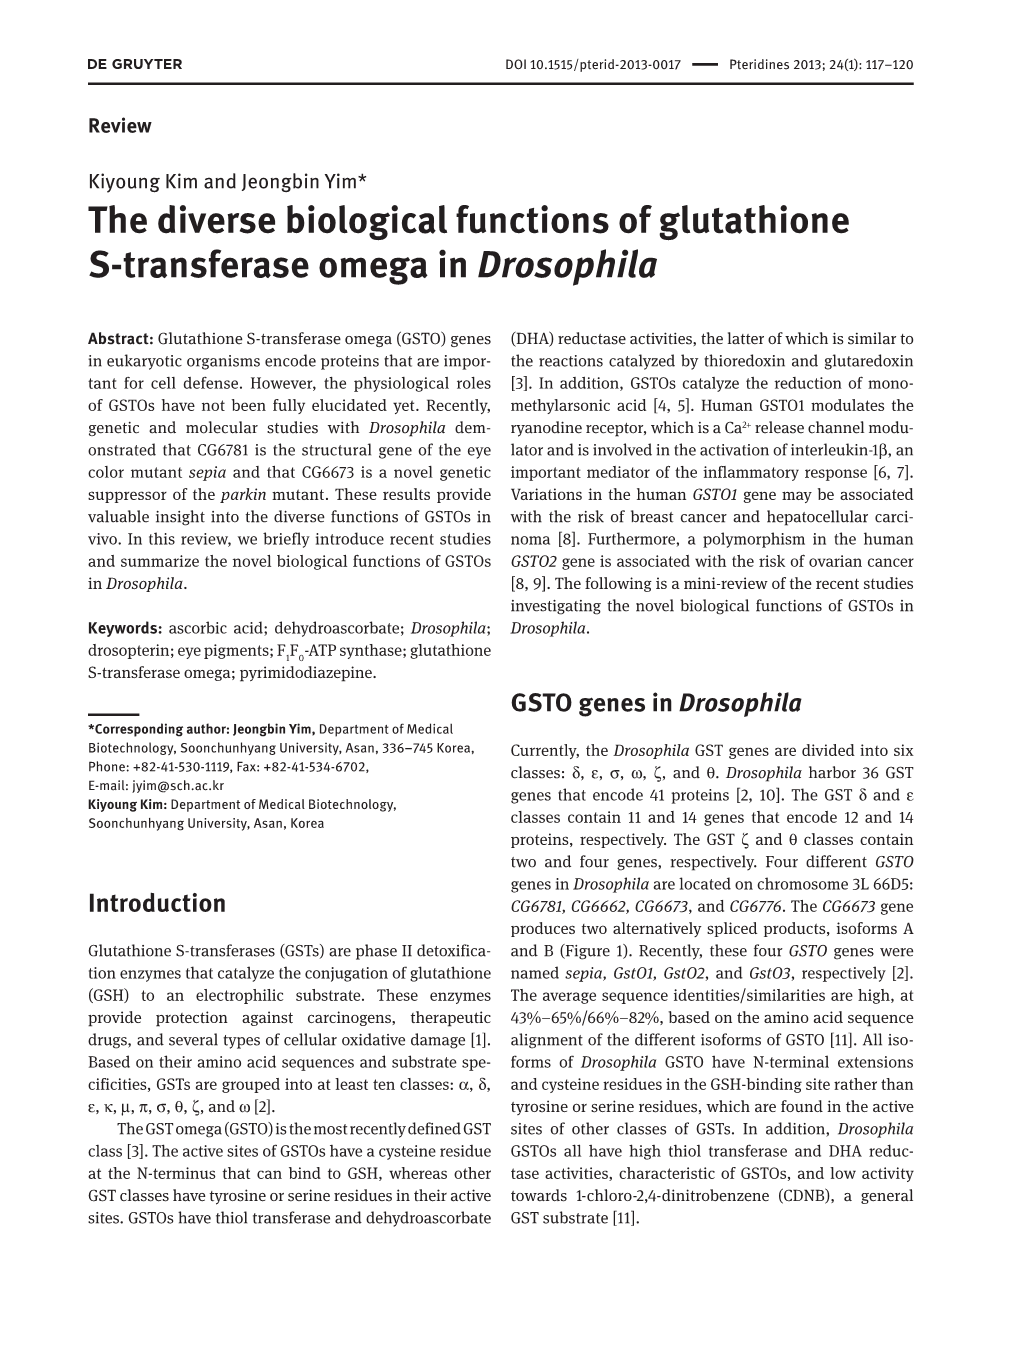 The Diverse Biological Functions of Glutathione S-Transferase Omega in Drosophila